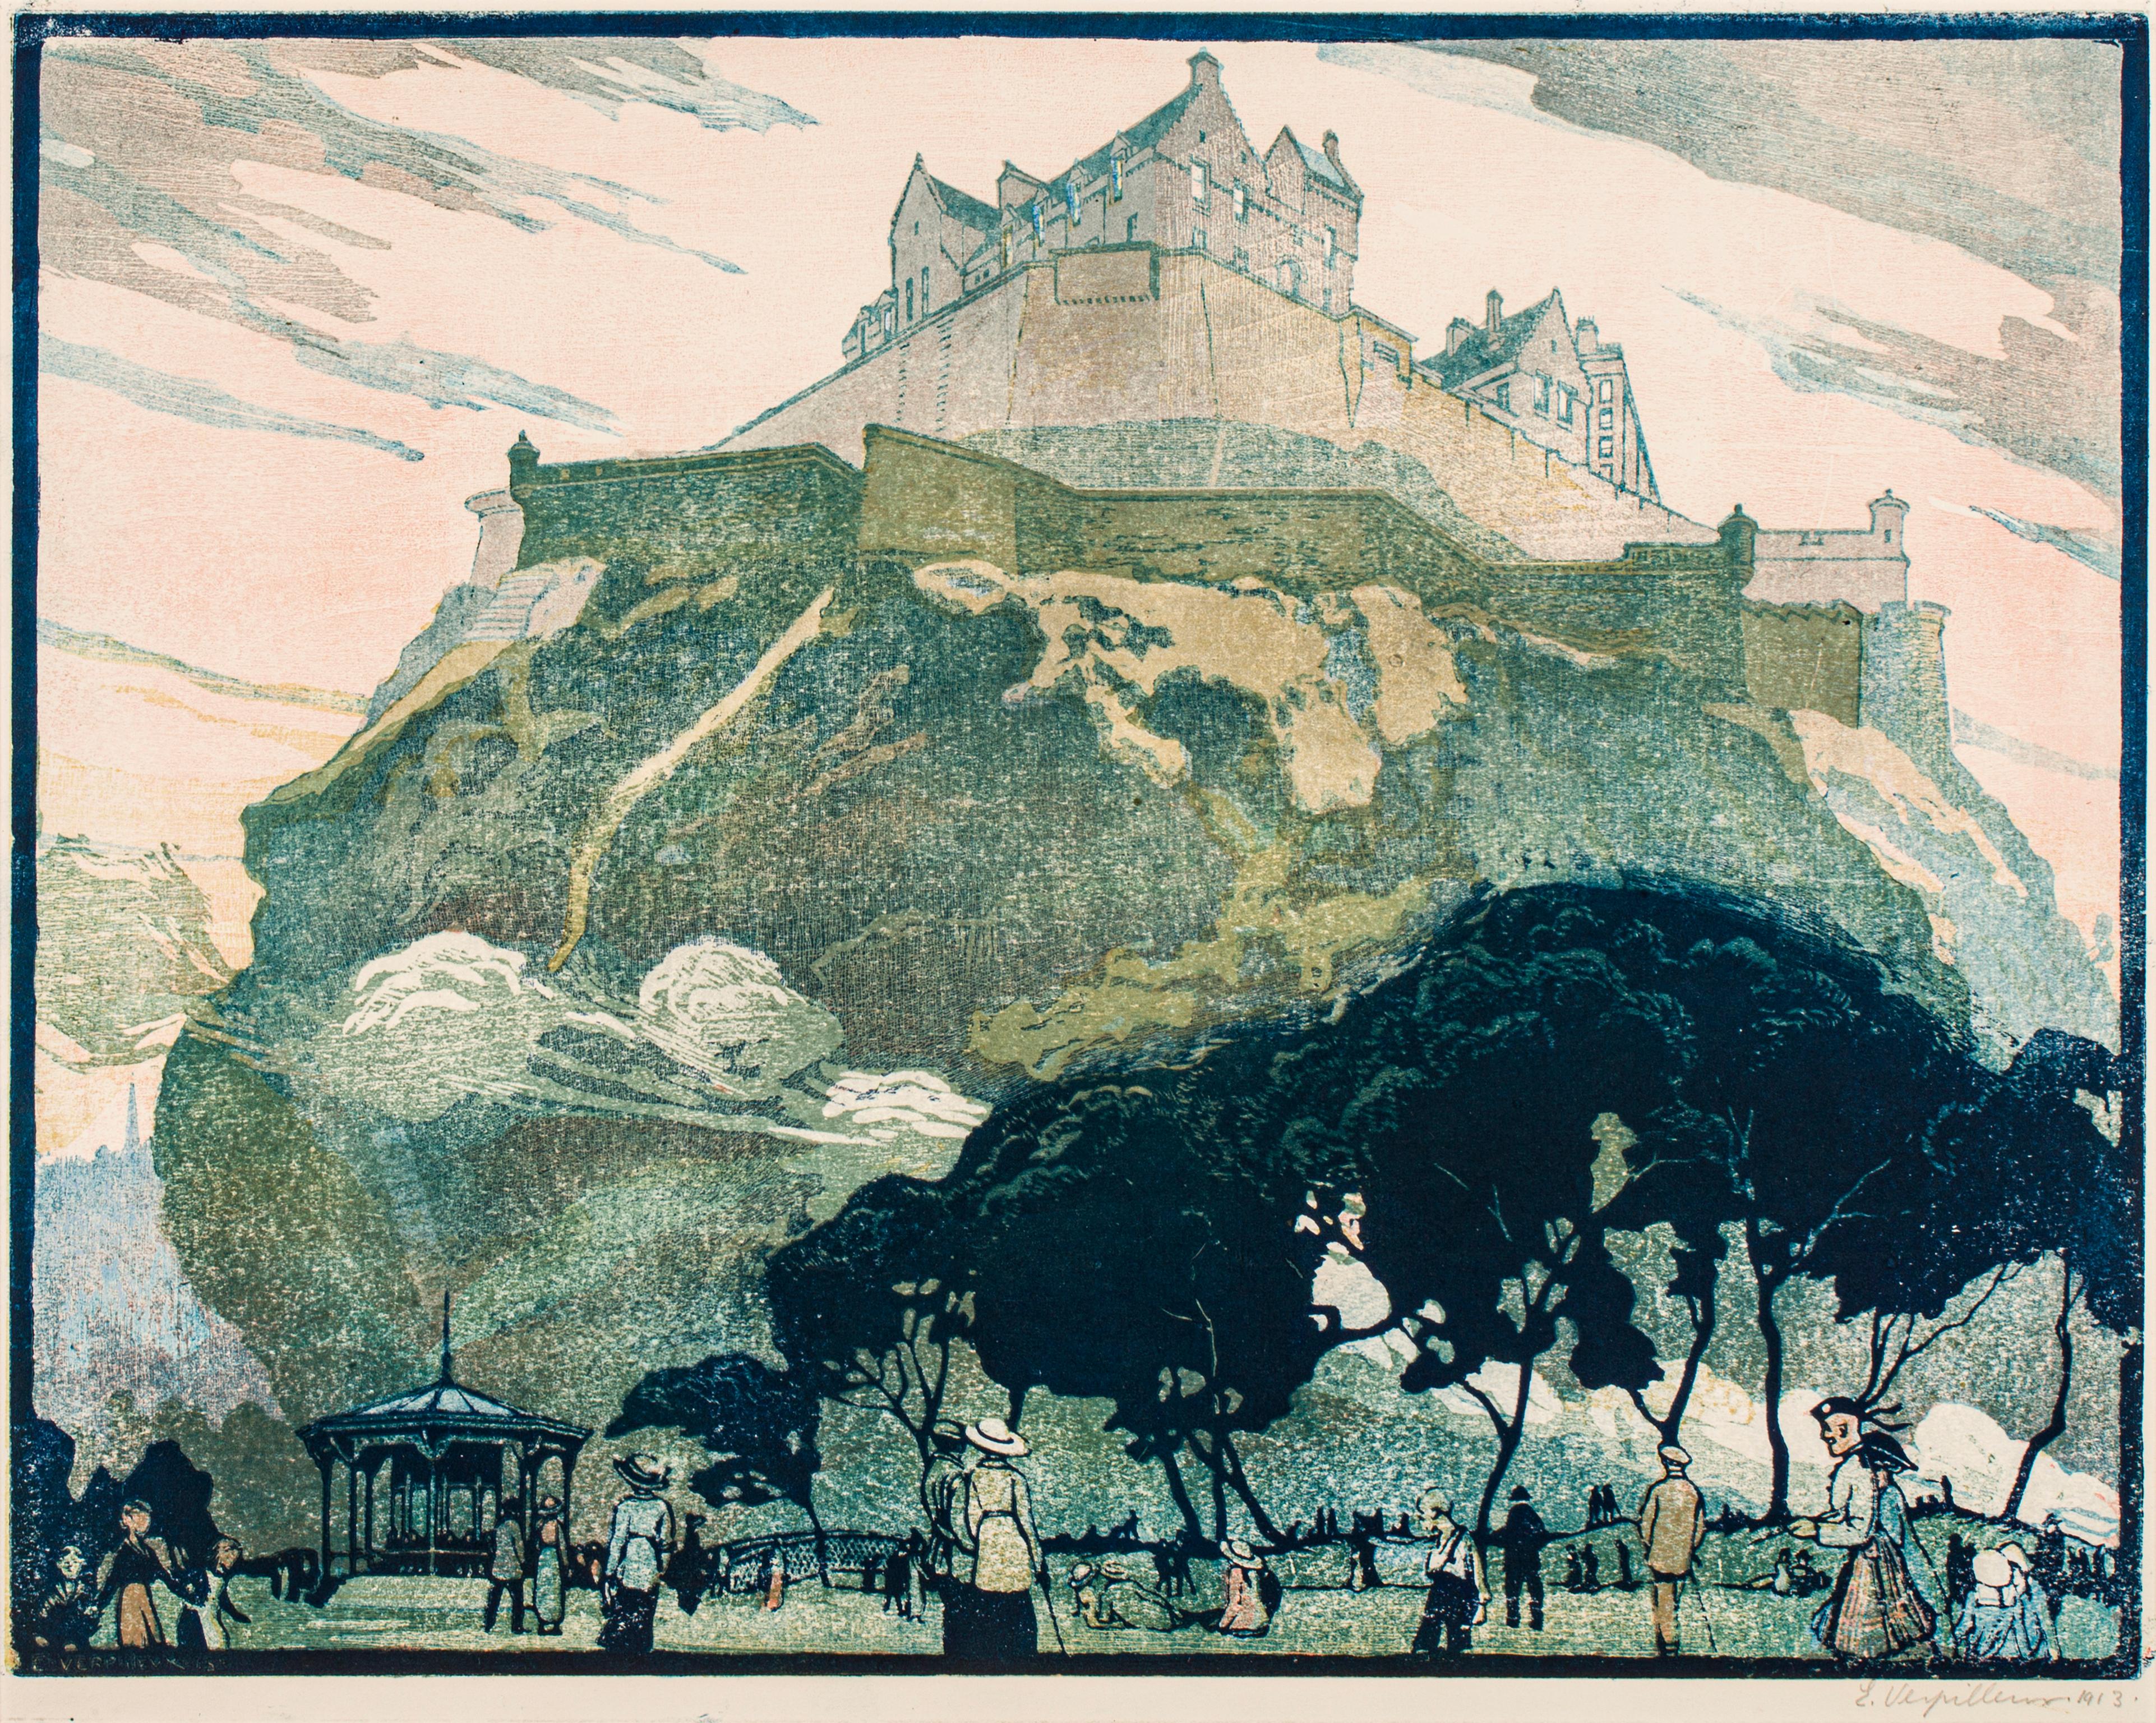 Emile Antoine Verpilleux, 1888-1964
Edinburgh Castle, 1913
Original woodcut, printed in colors
14 ½ x 18 inches
signed and dated 'E. Verpilleux 1913',  in pencil